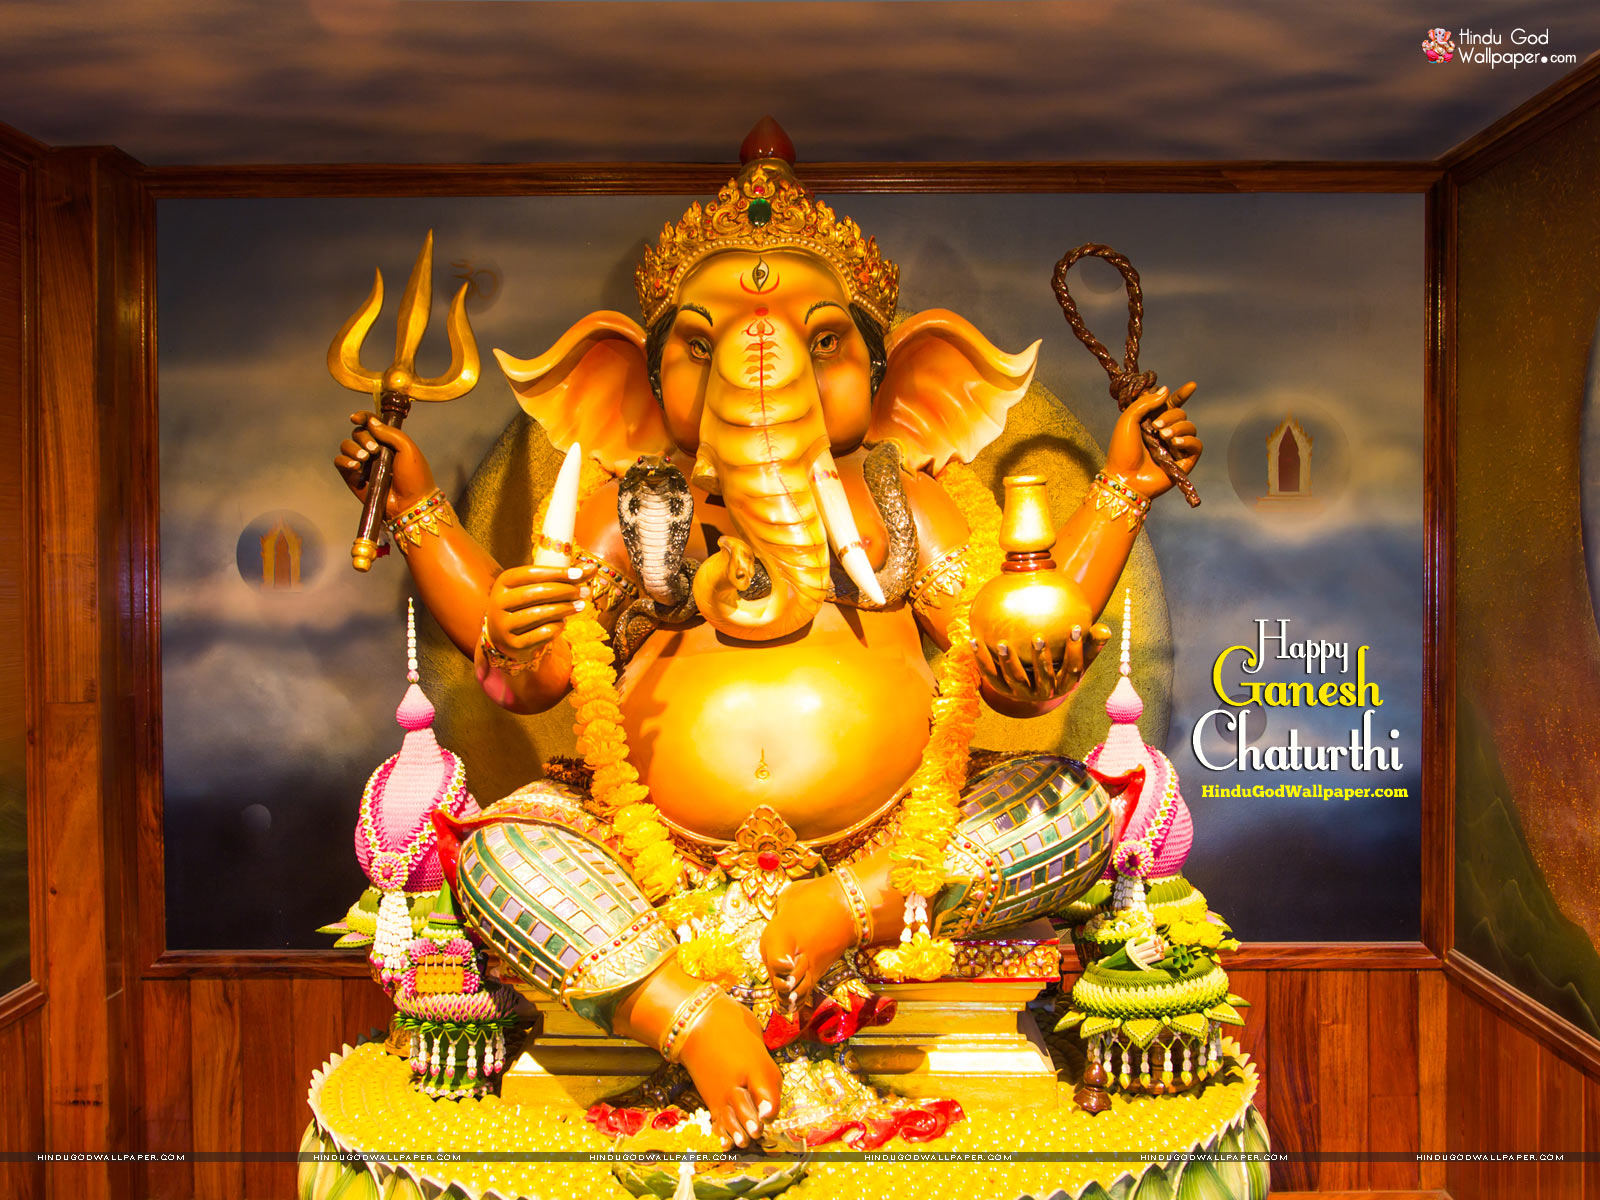 Happy Ganesh Chaturthi Wishes Wallpapers Download